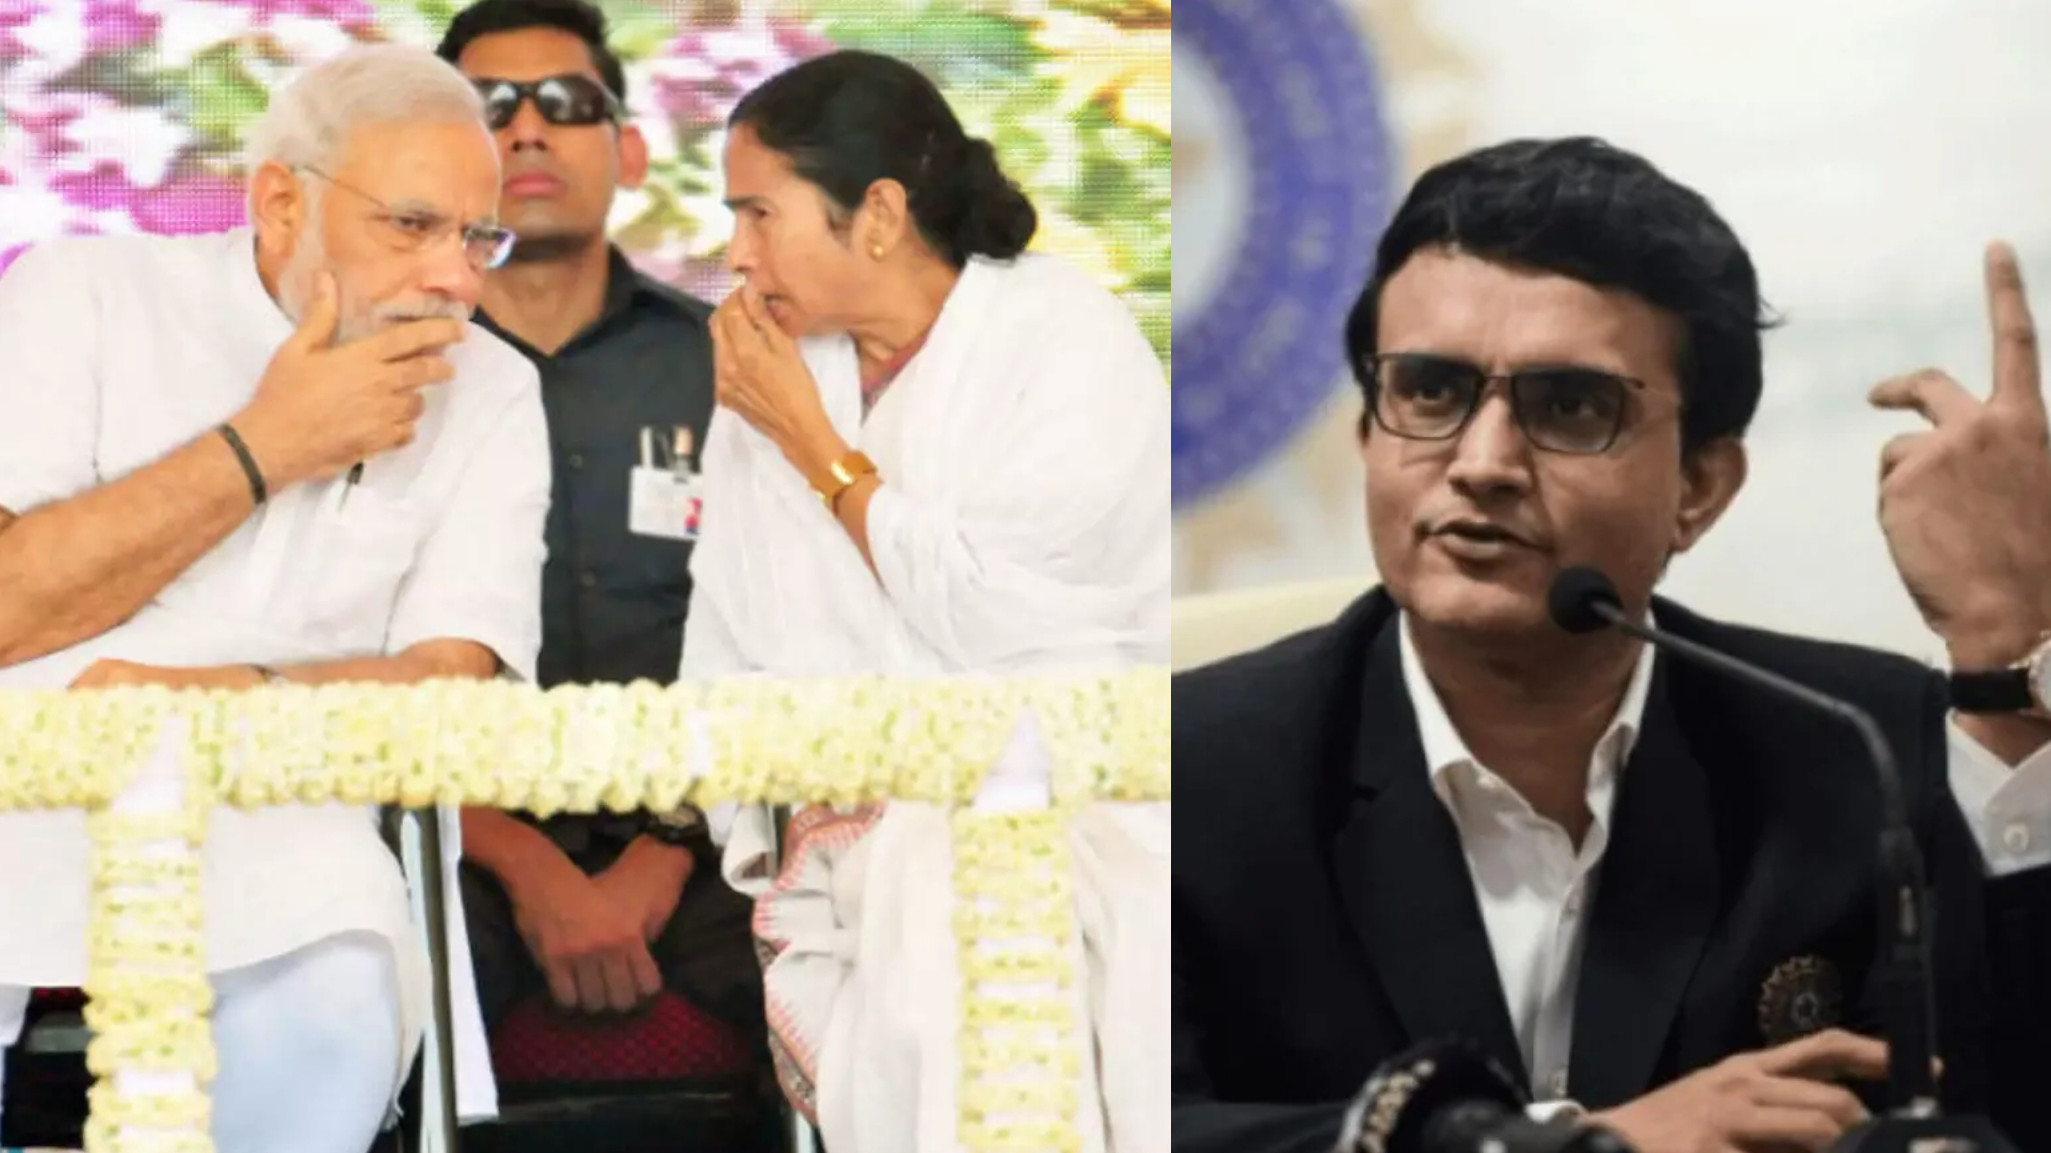 Mamata Banerjee appeals to PM Narendra Modi that Sourav Ganguly should be allowed to contest for ICC chairman post